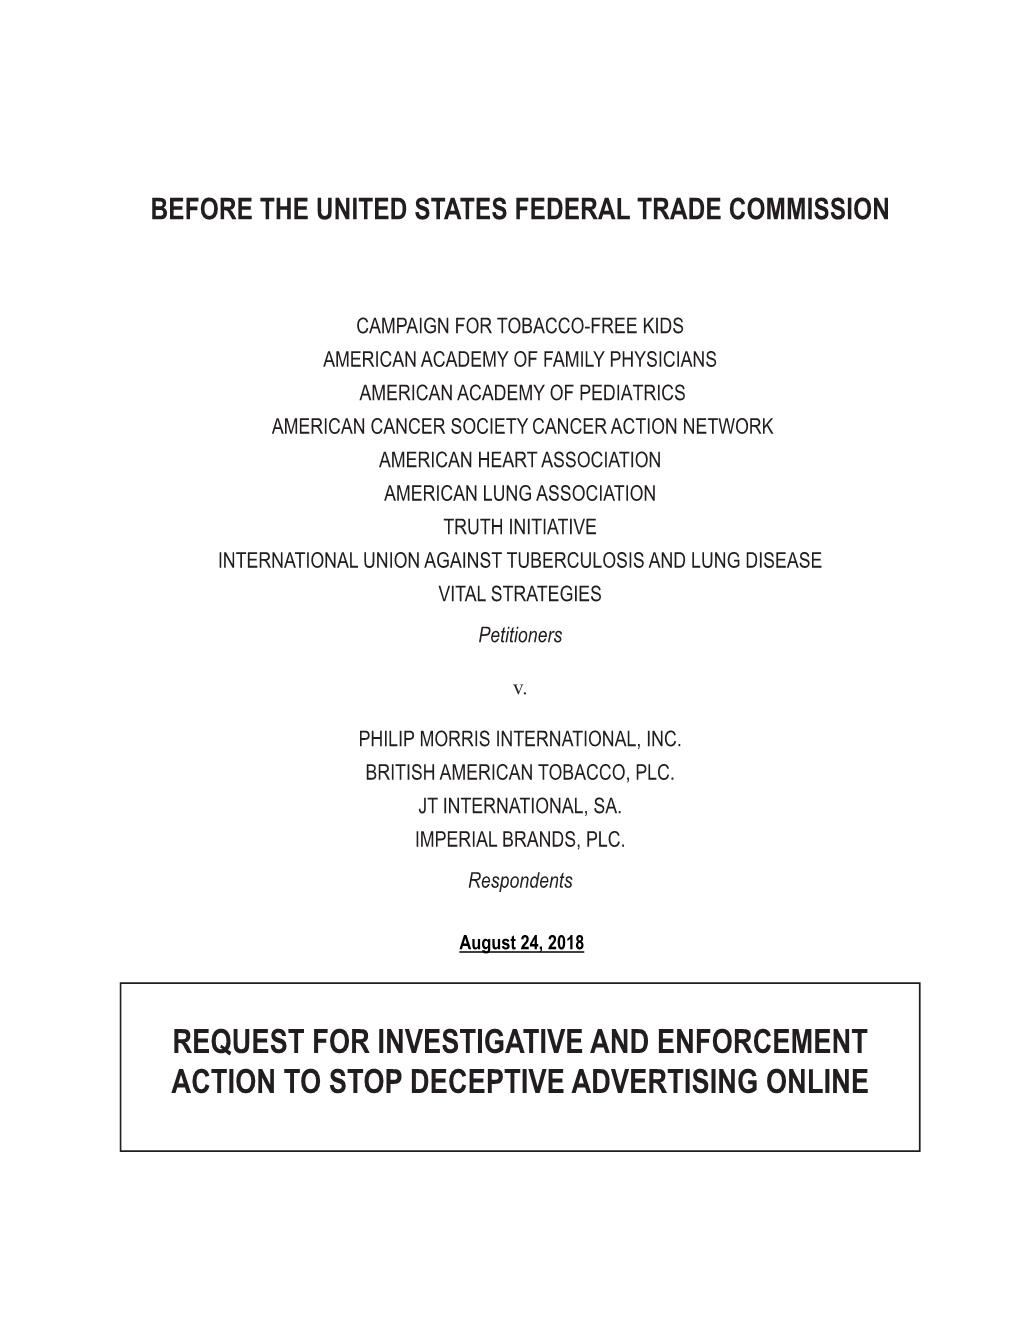 Petition to US FTC: Request for Investigative and Enforcement